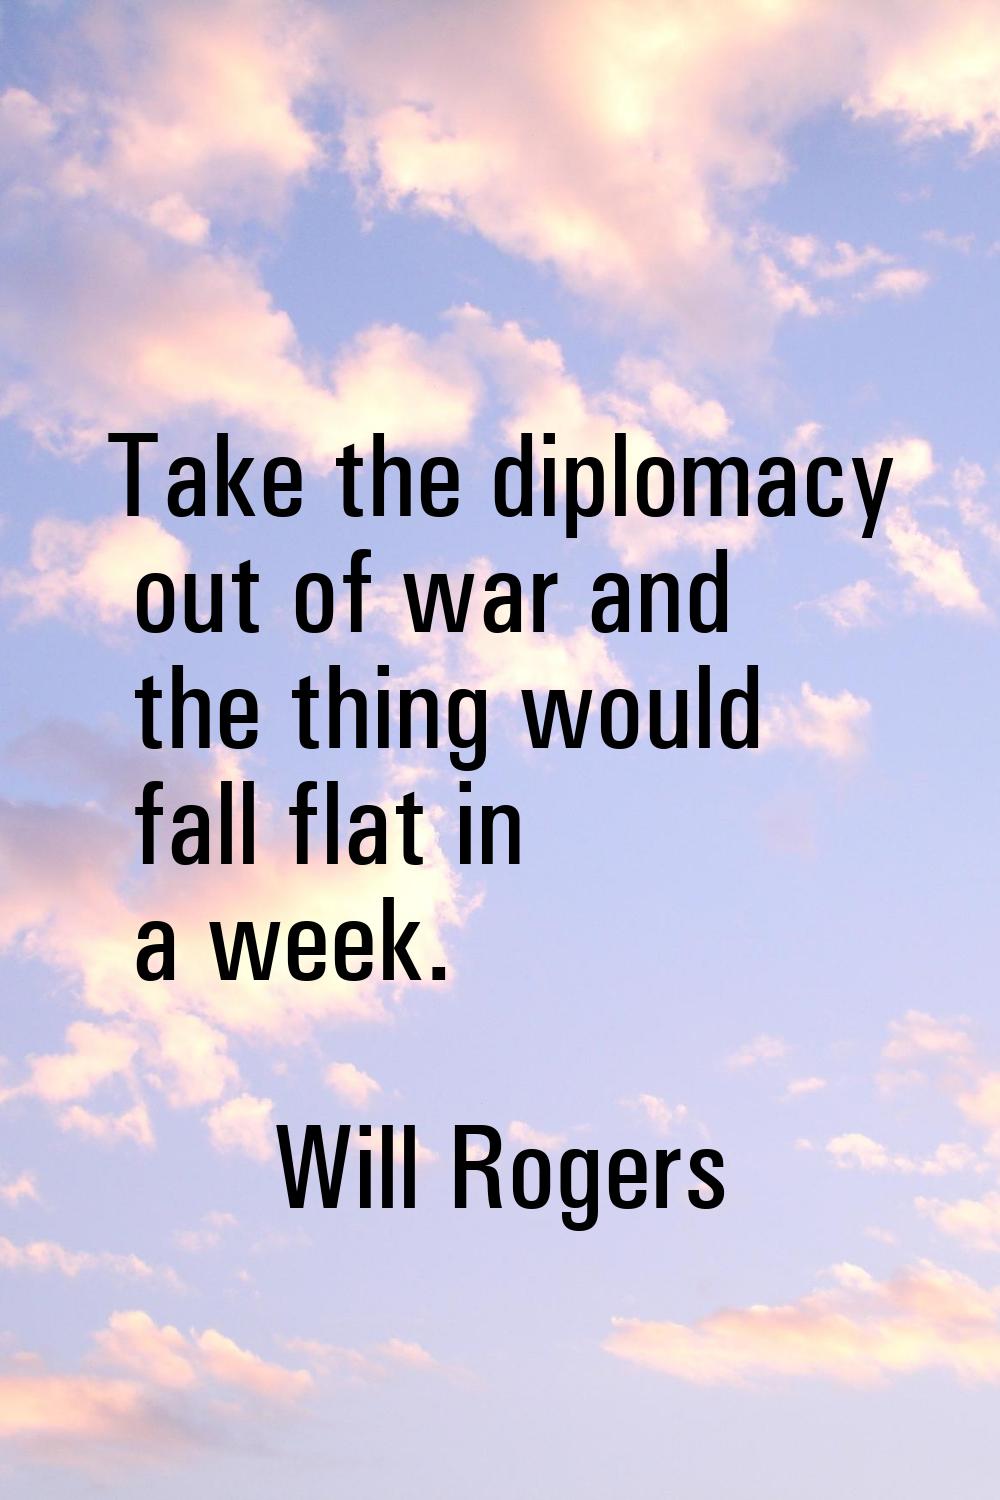 Take the diplomacy out of war and the thing would fall flat in a week.